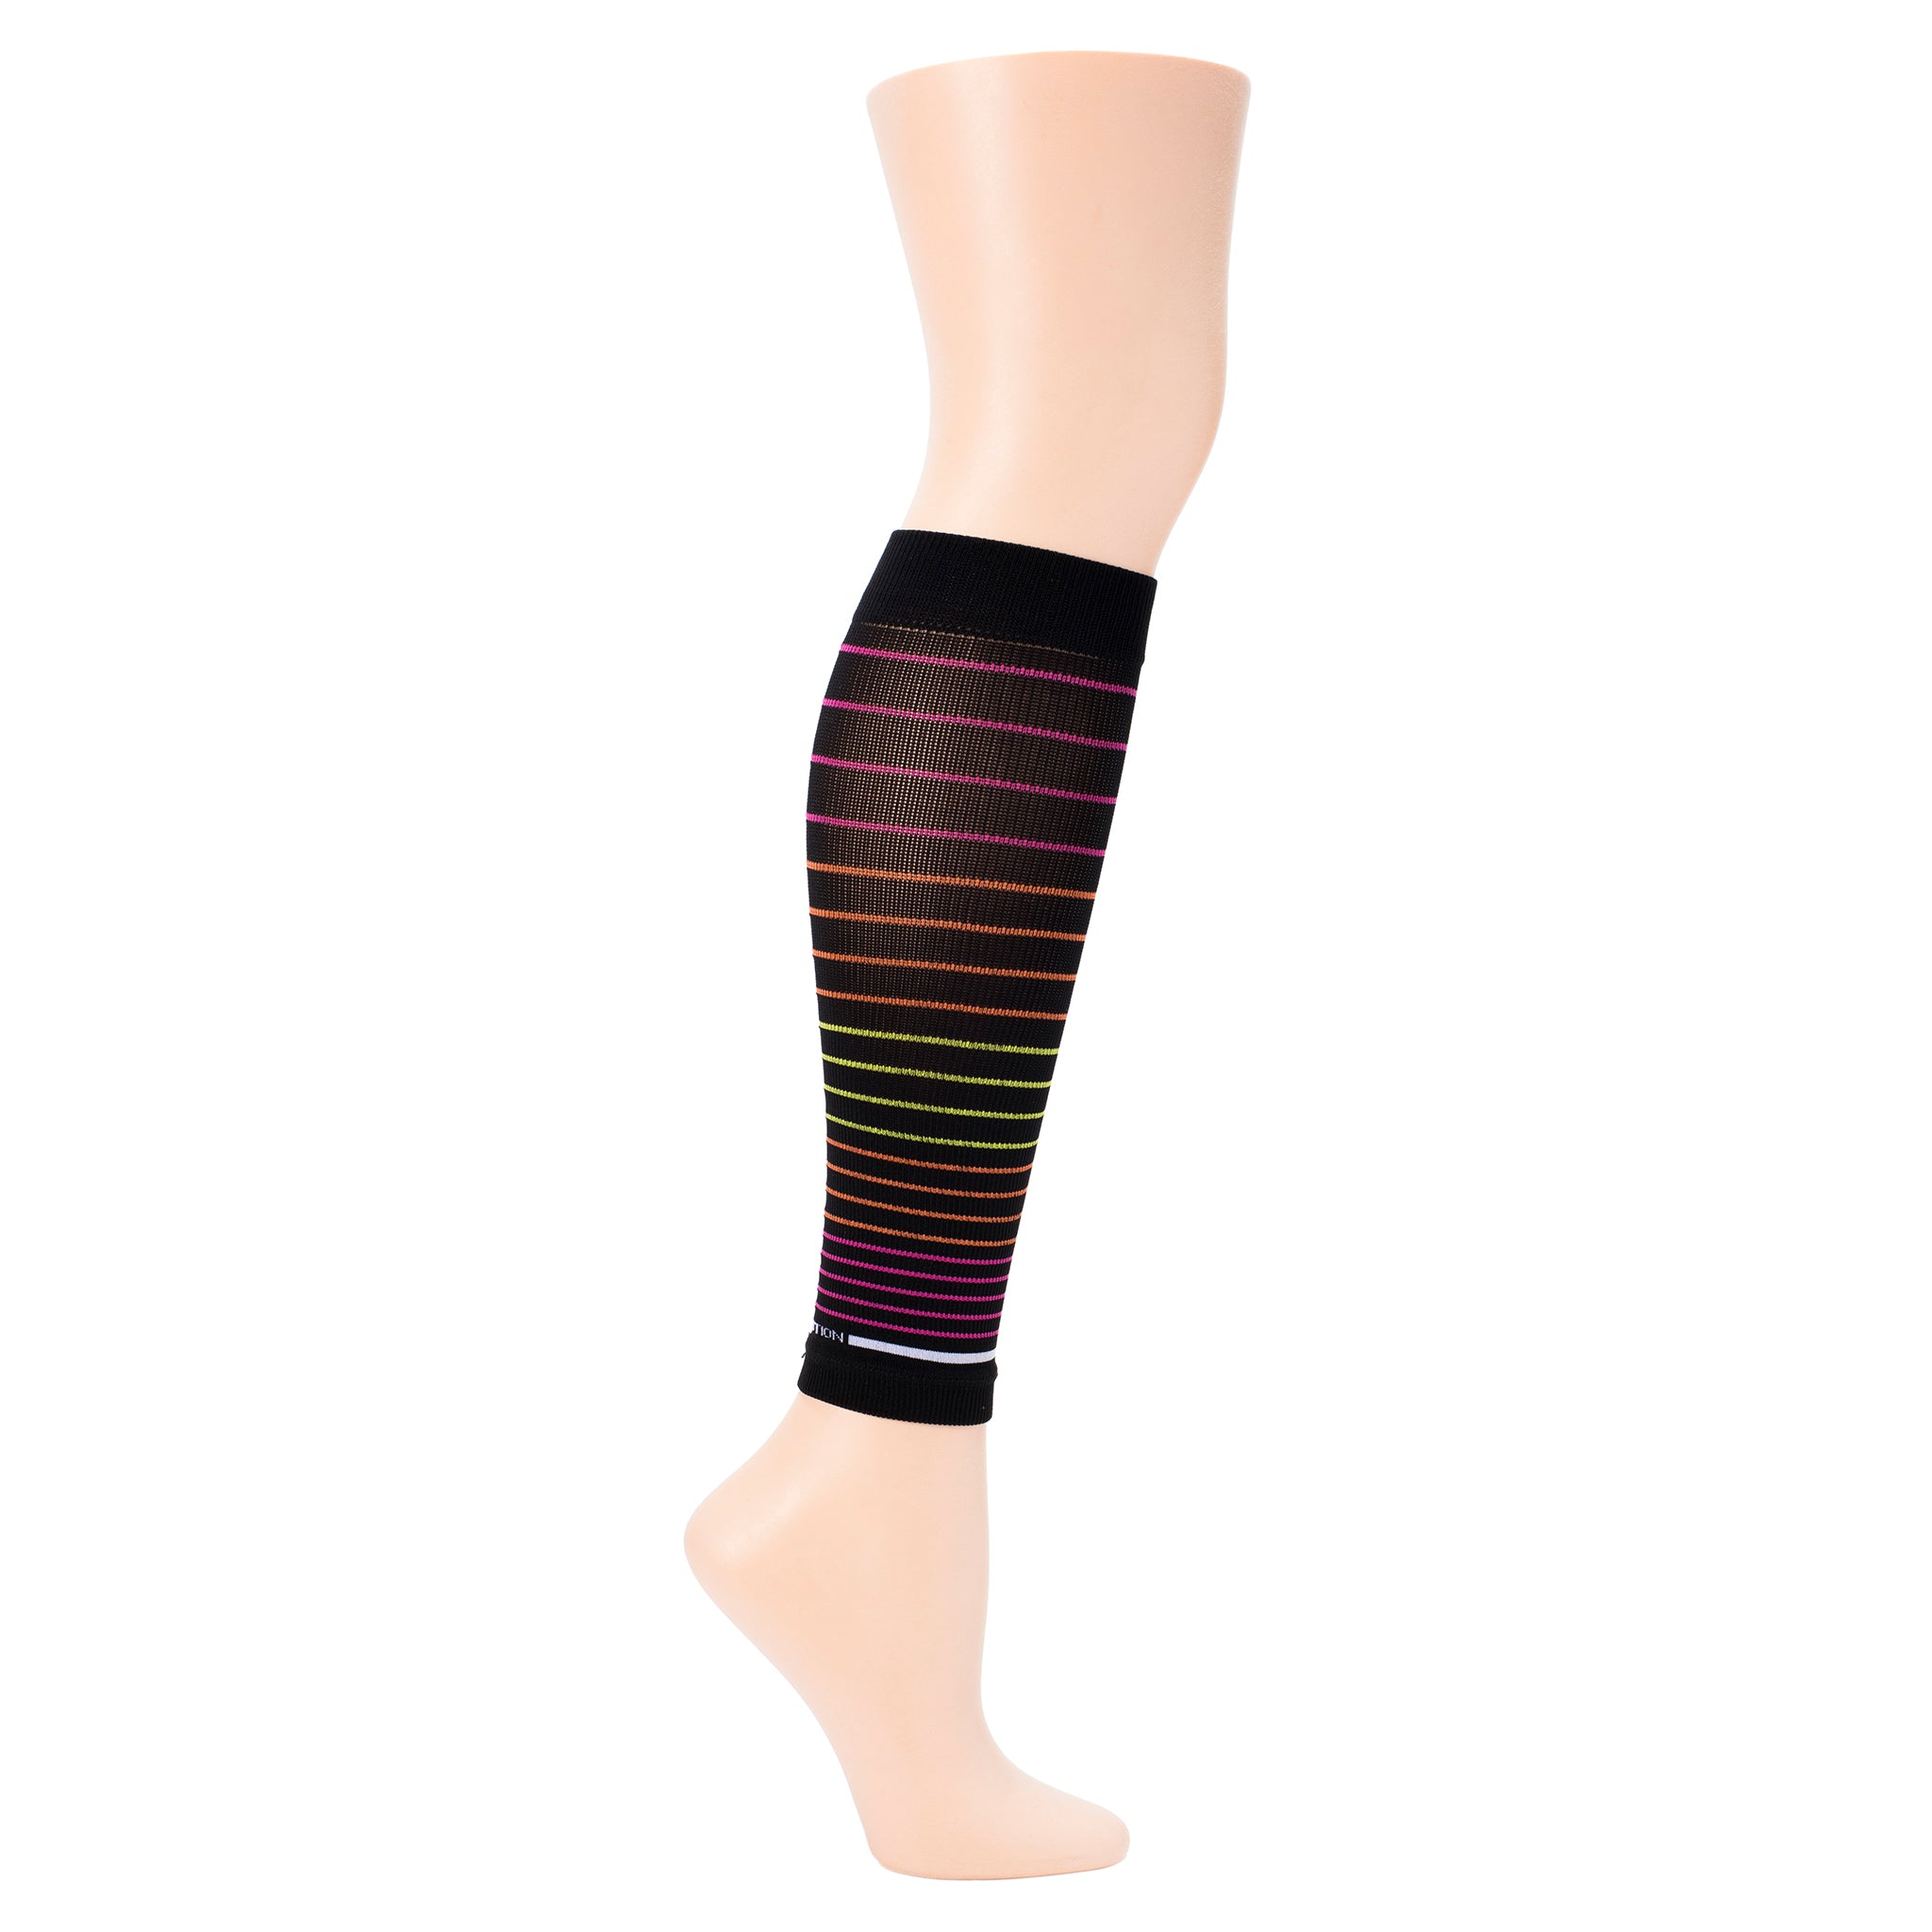 Compression Stockings for Men